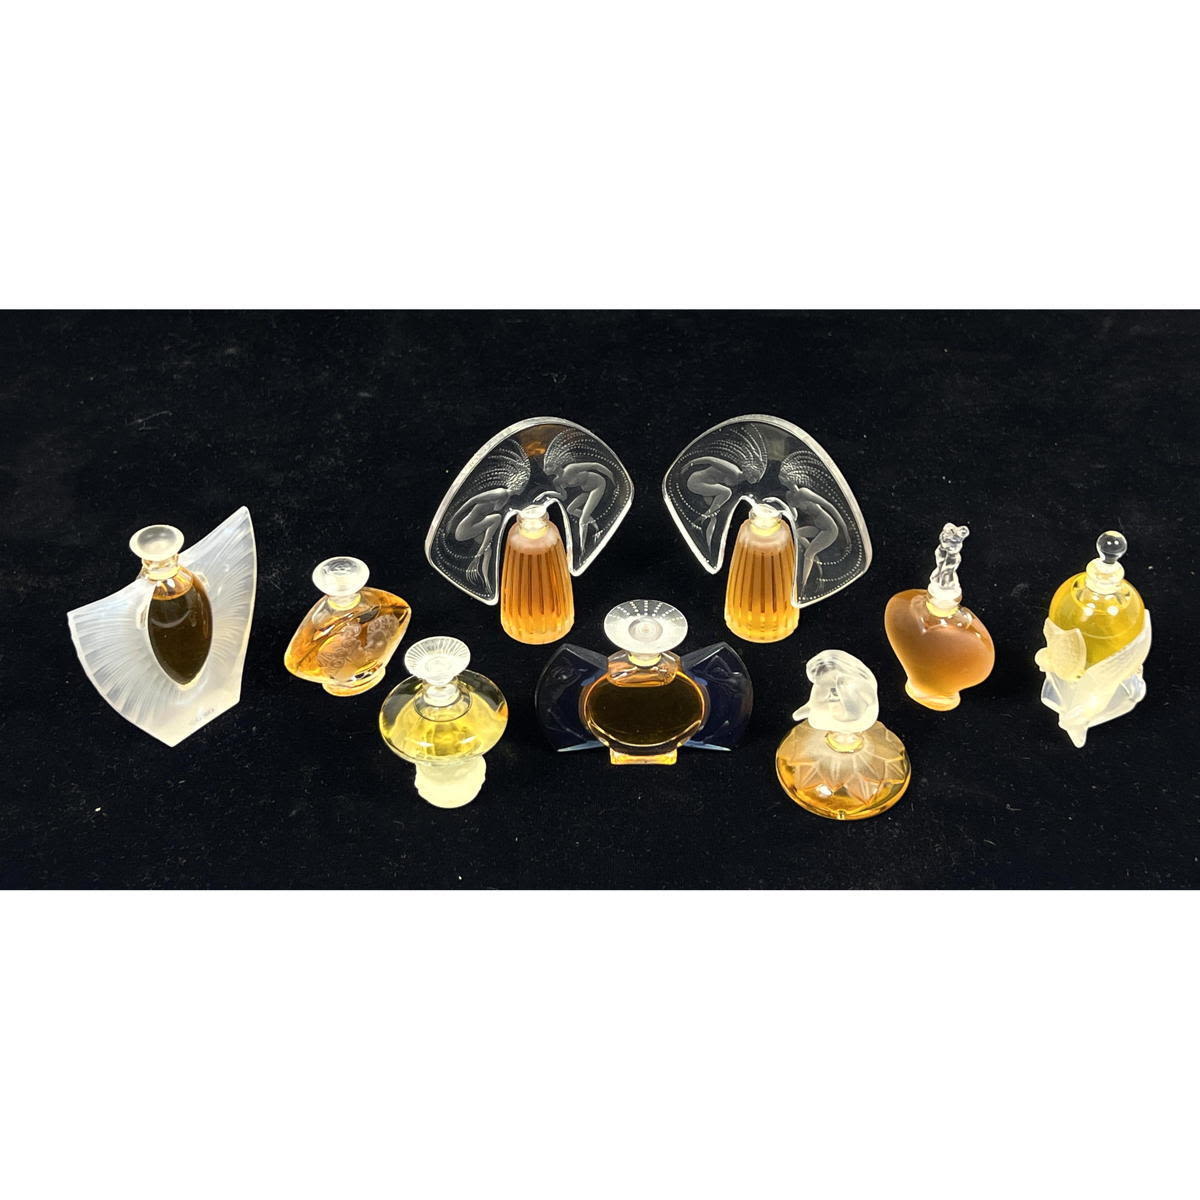 9pc Miniature Perfume Bottles. Mostly